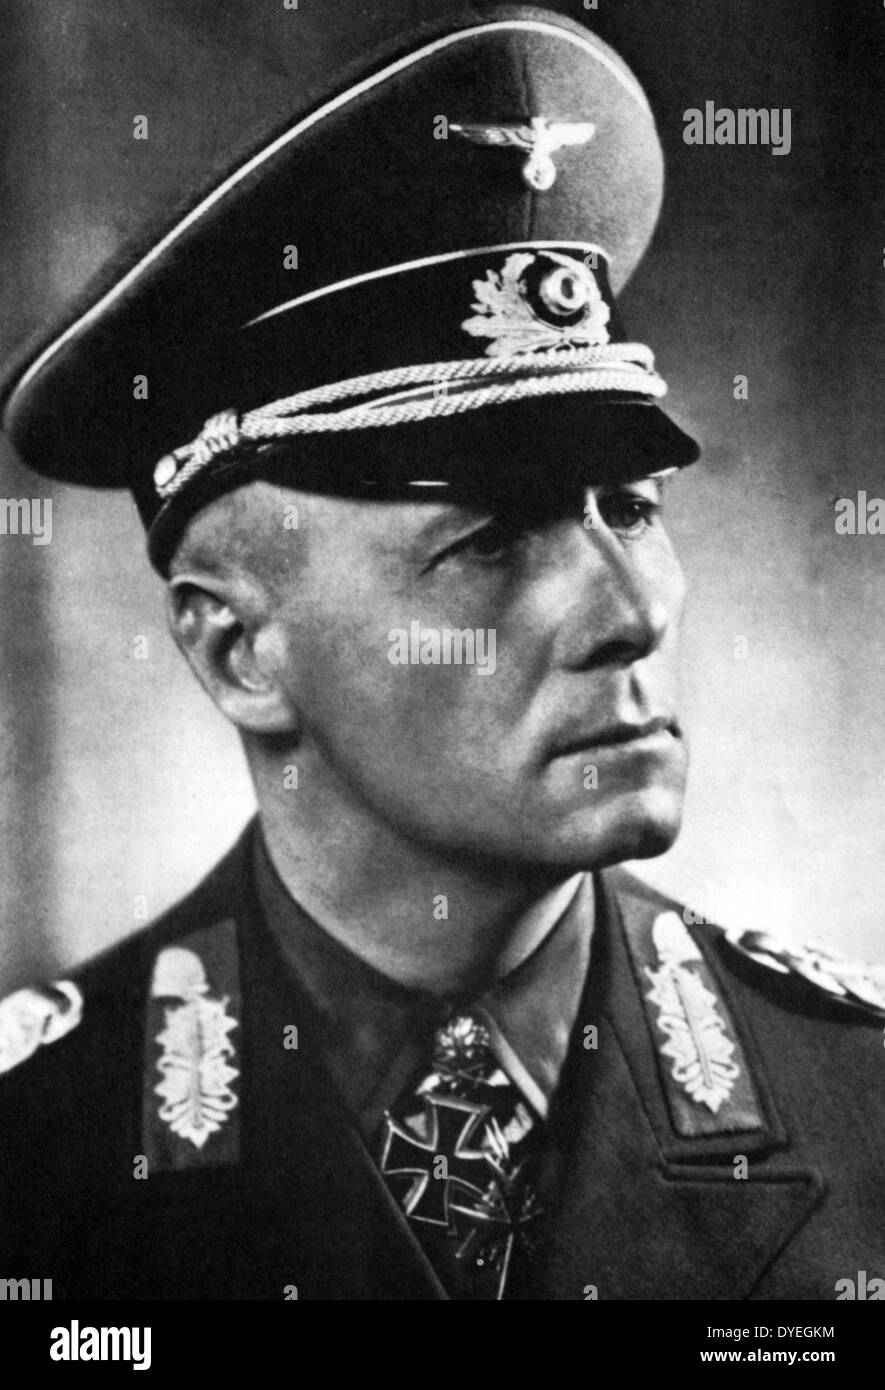 General Johanness Eugen Rommel (1891-1944) popularly known as The Desert Fox was a German Field Marshal of World War 11. He earned the respect of both his own troops and the enemies he fought. Stock Photo